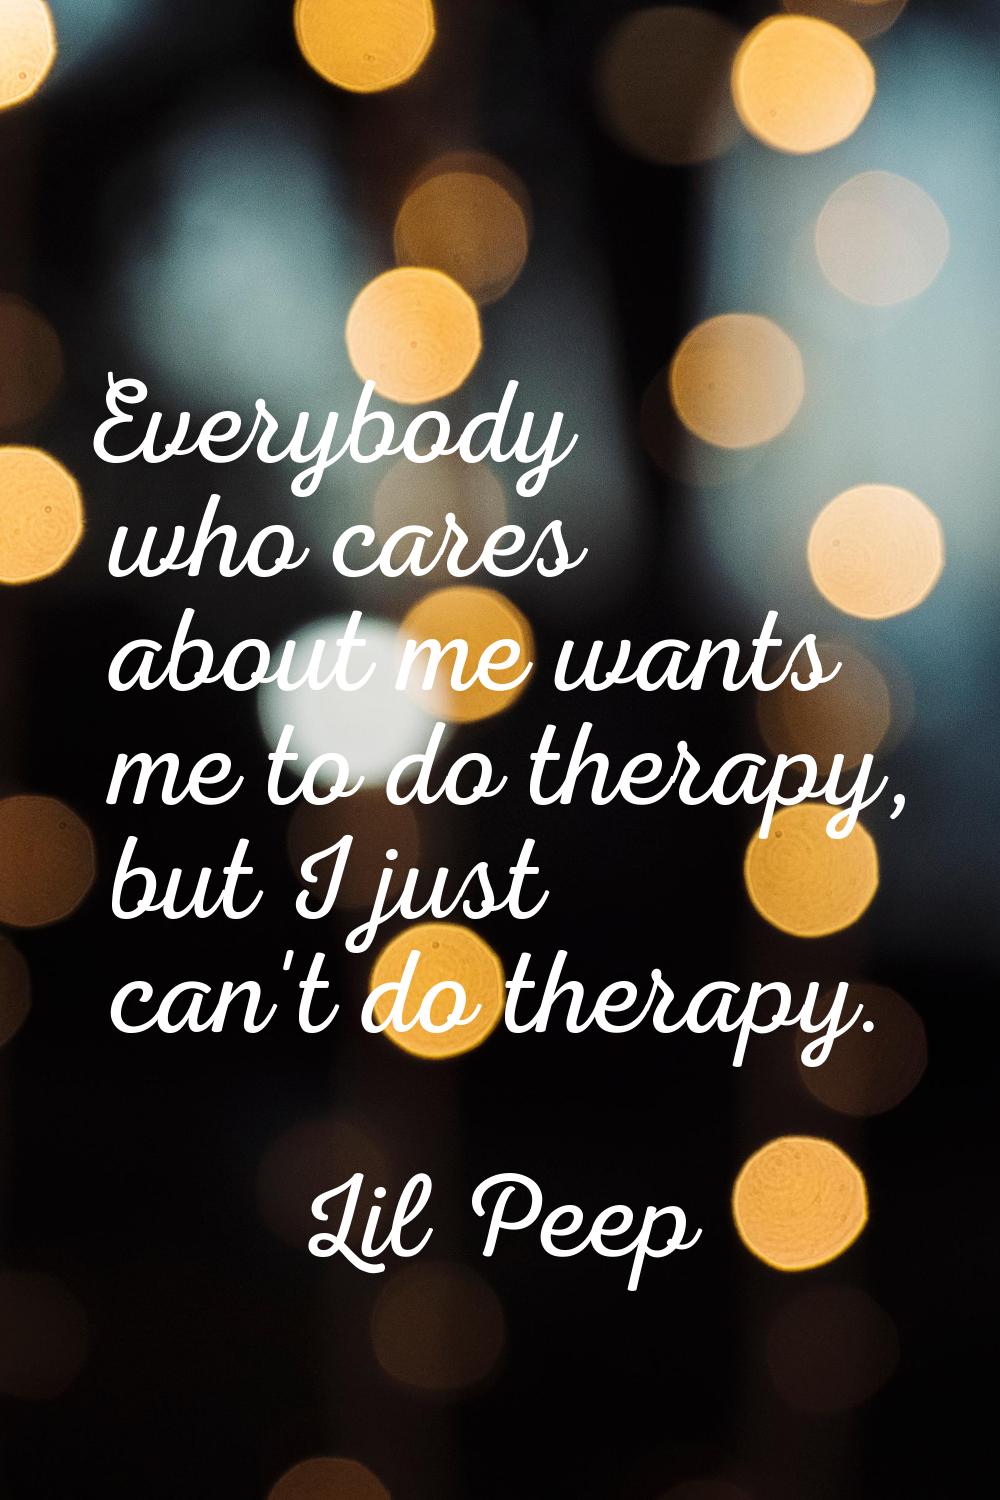 Everybody who cares about me wants me to do therapy, but I just can't do therapy.